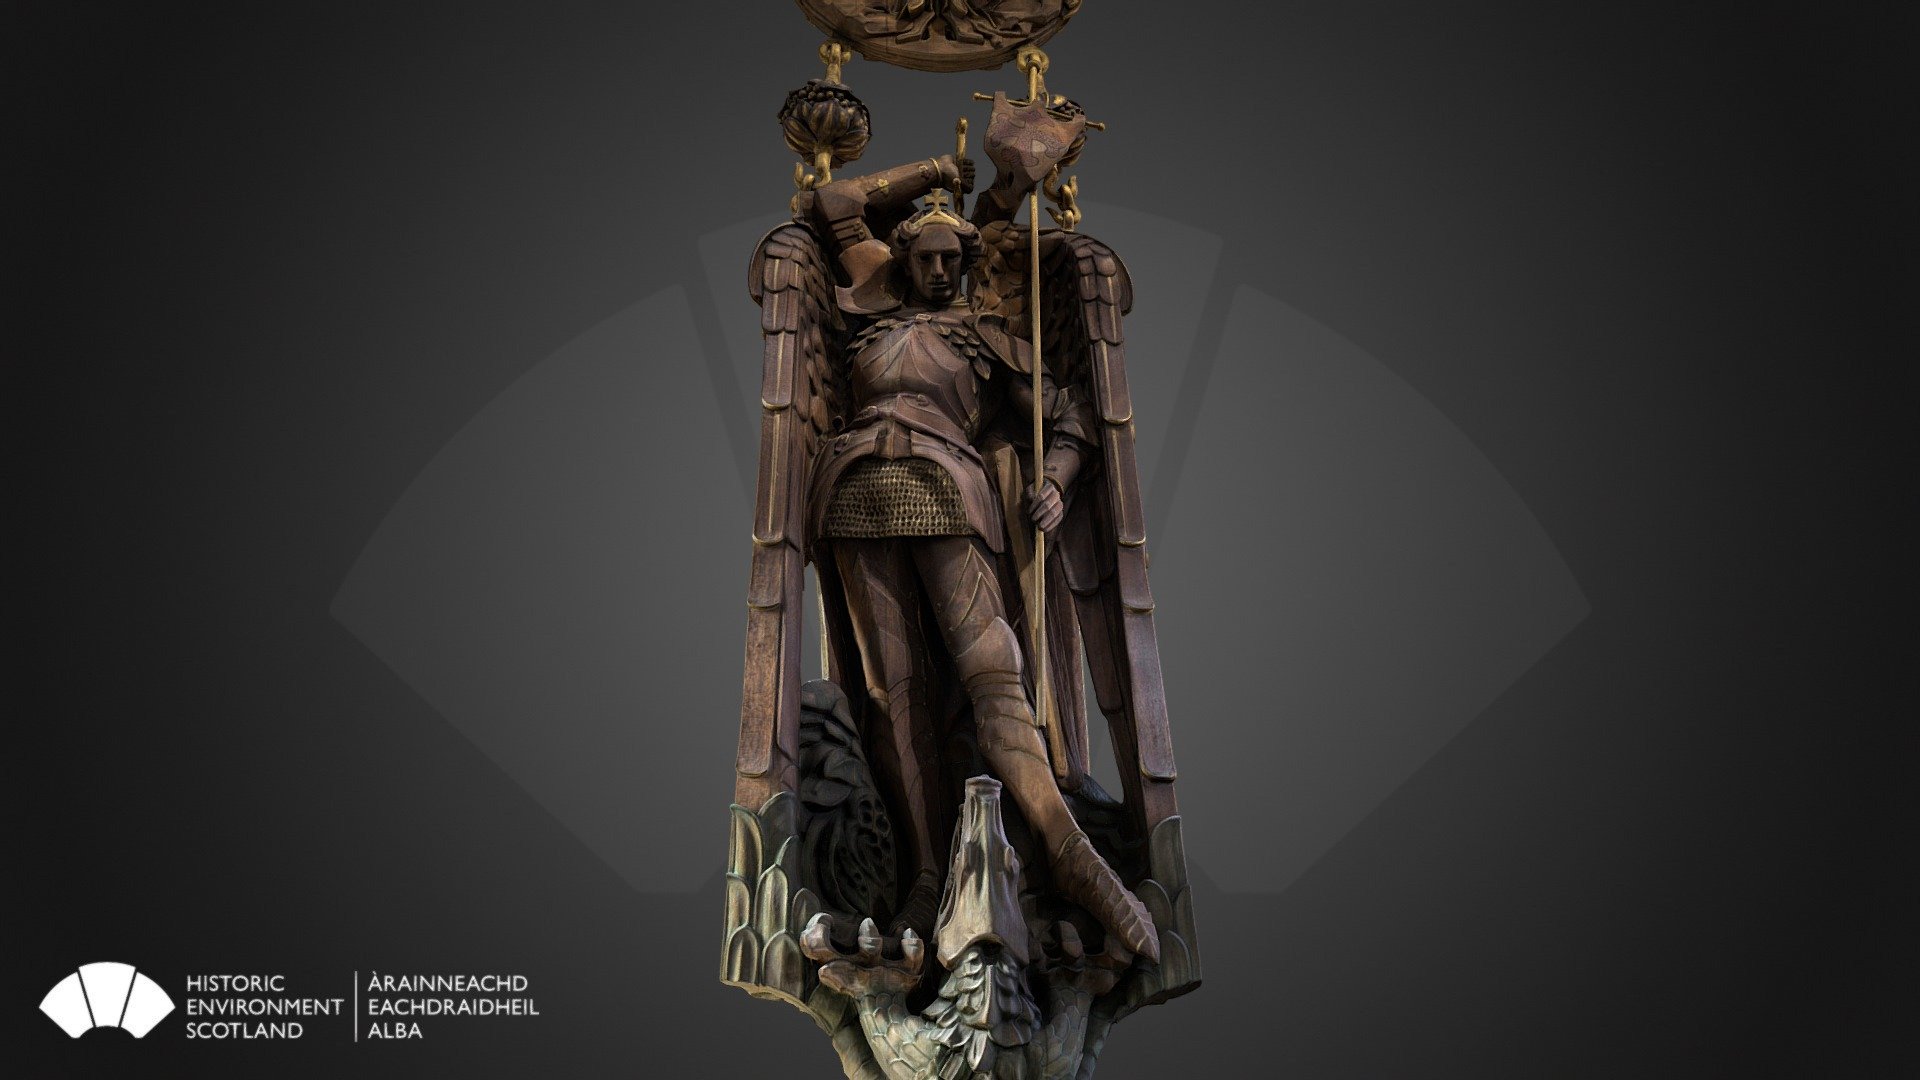 This timber carving of the archangel St Michael stands at 3.3 metres tall, with its large medallion engraved with a cross coming in at 5.4 meters and is suspended from the vaulted ceiling on the Scottish National War Memorial 9.3 metres above the casket that holds the Roll of Honour of the Scottish War Dead. 

The carving is made of Scottish Oak and was made by the Clow brothers from a design by Alice Meredith-Williams. 

The Scottish War Memorial opened in 1927 after the former North Barracks were altered. It is located at the North side of Crown Square, at the site of the church of St Mary, previously used as munitions store in the 1530s. 

It is cared for on behalf of the nation by a charity that is administered by a board of trustees. To learn more about it head over to our website 3d model